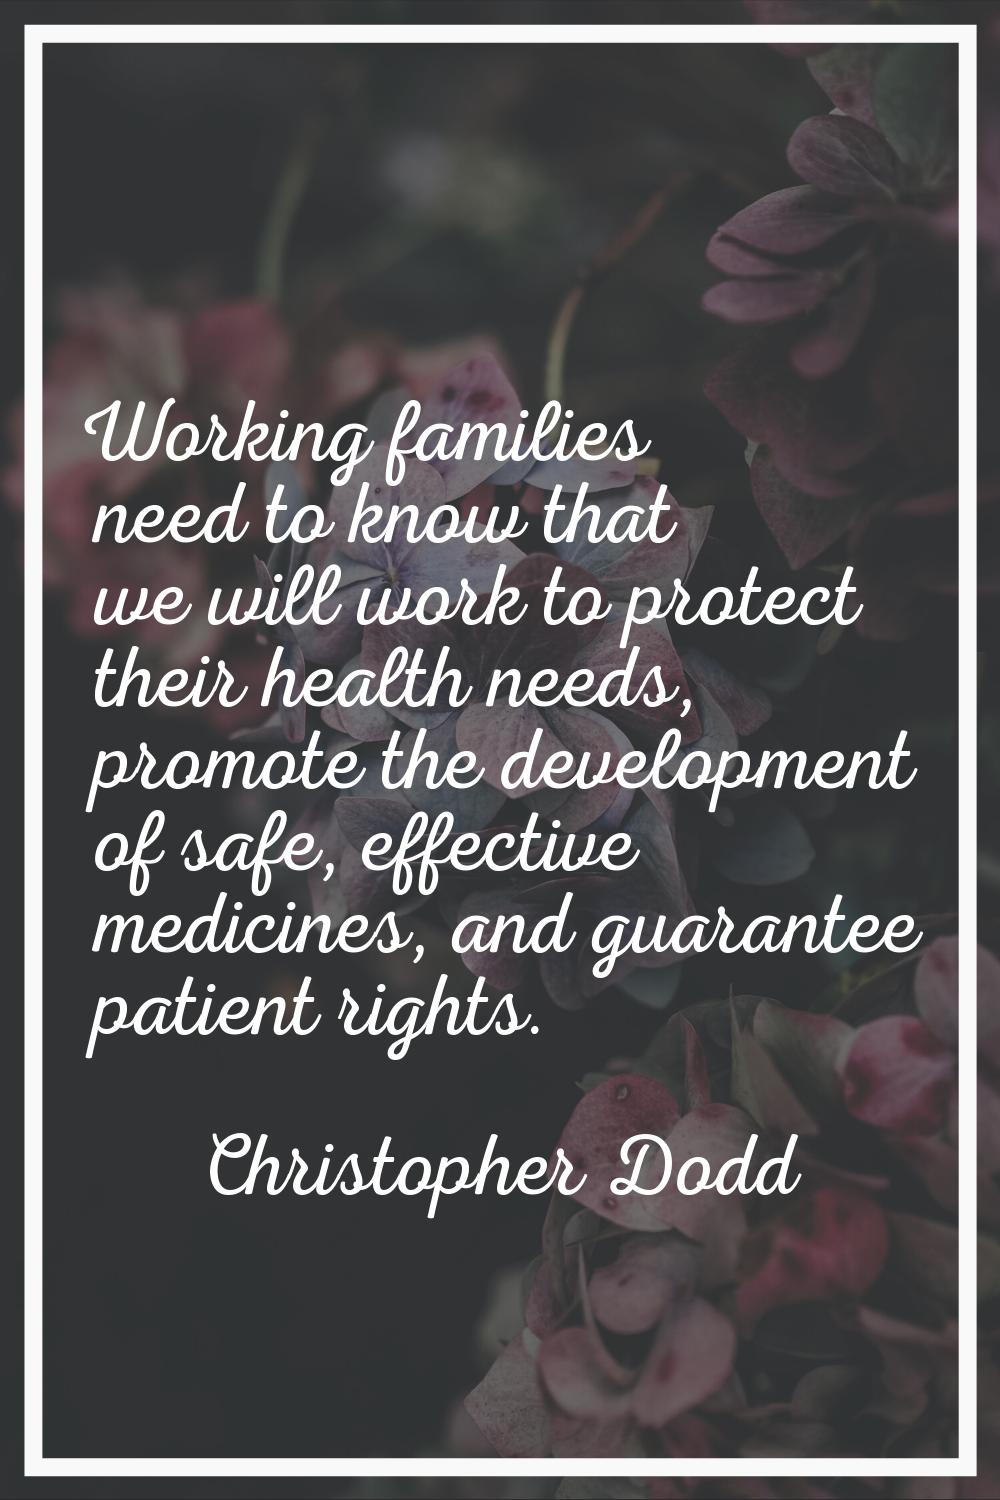 Working families need to know that we will work to protect their health needs, promote the developm